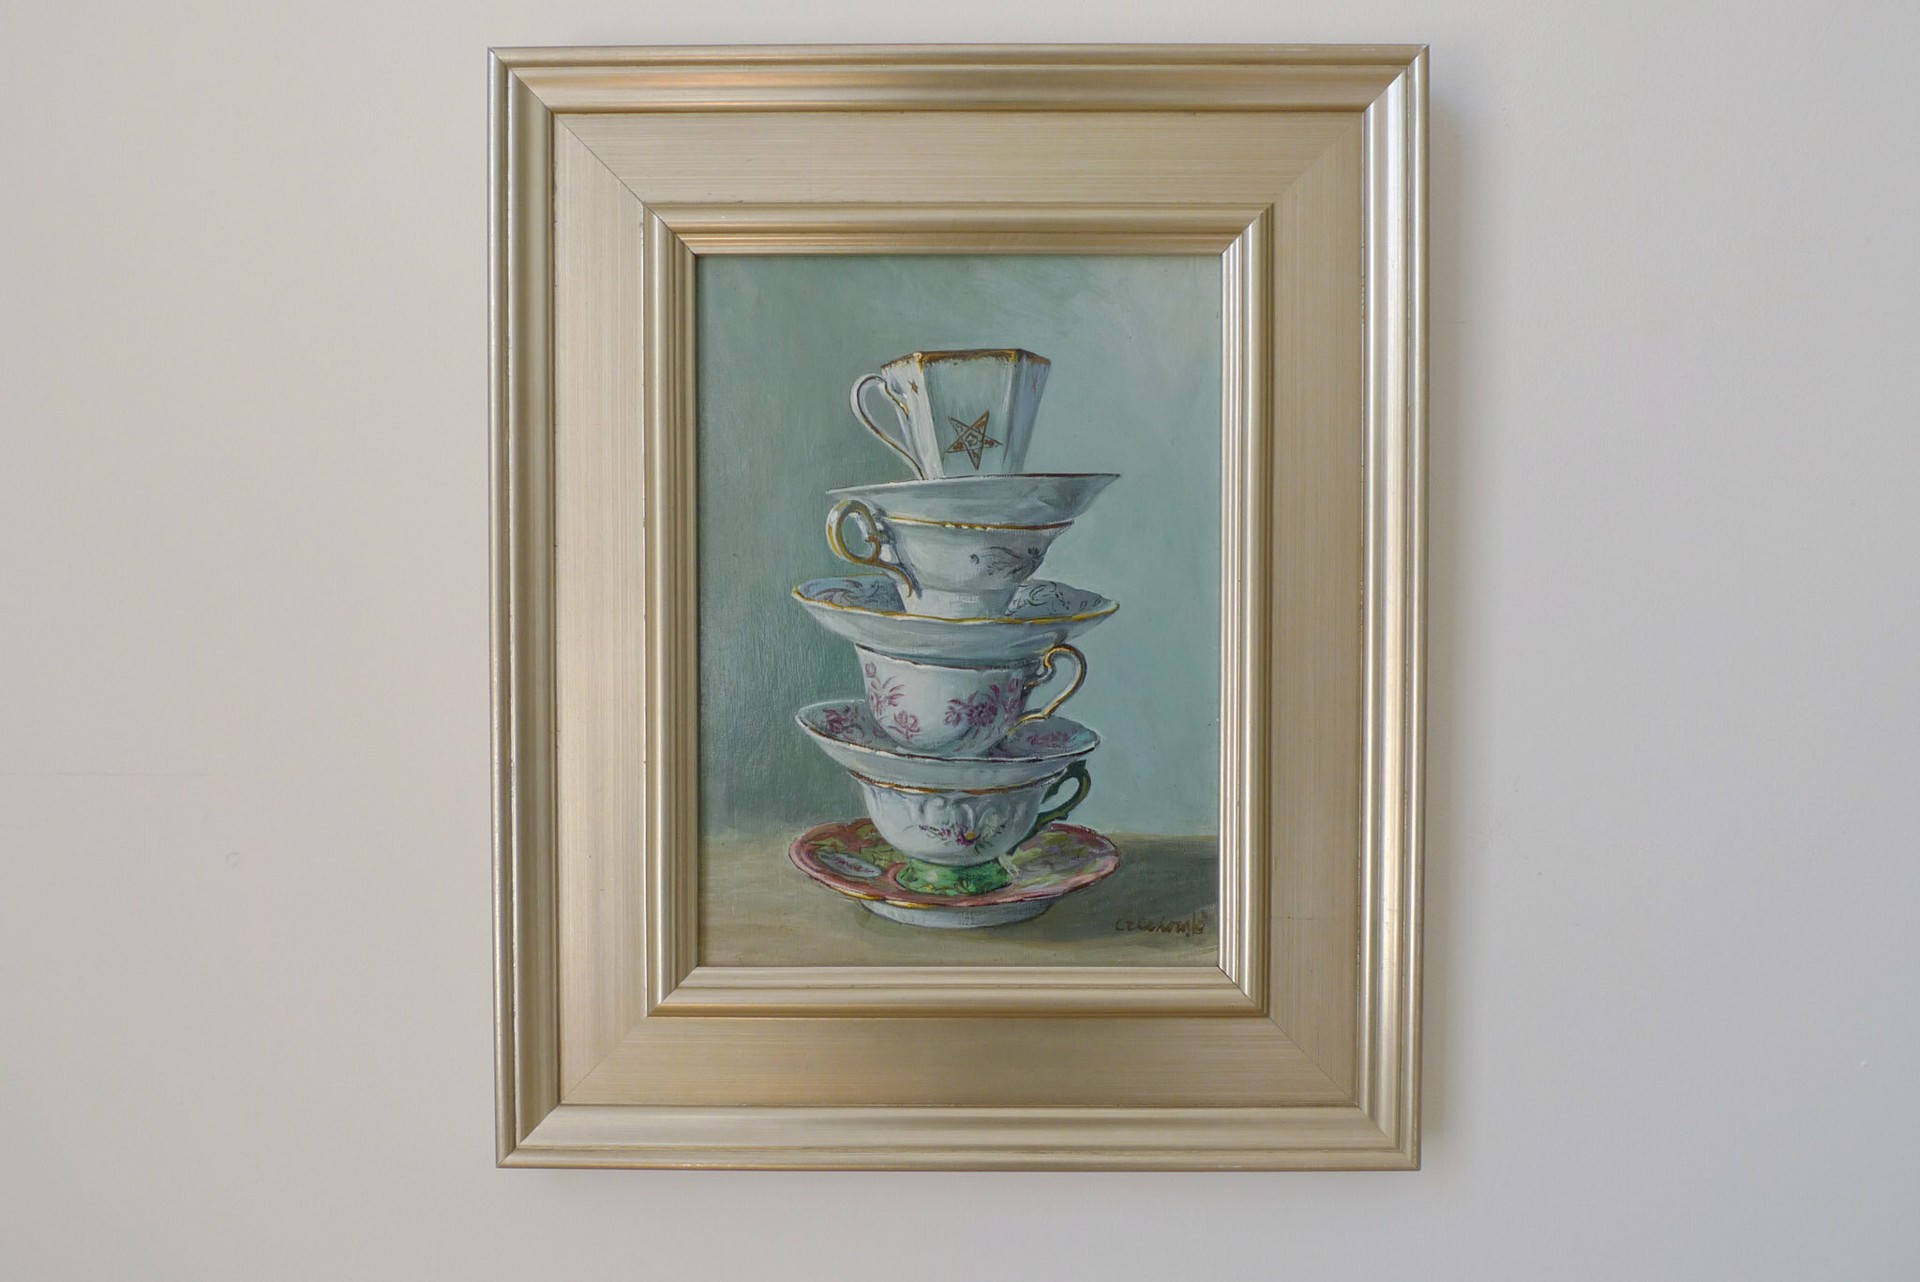 Stack of Teacups by Alicia Czechowski